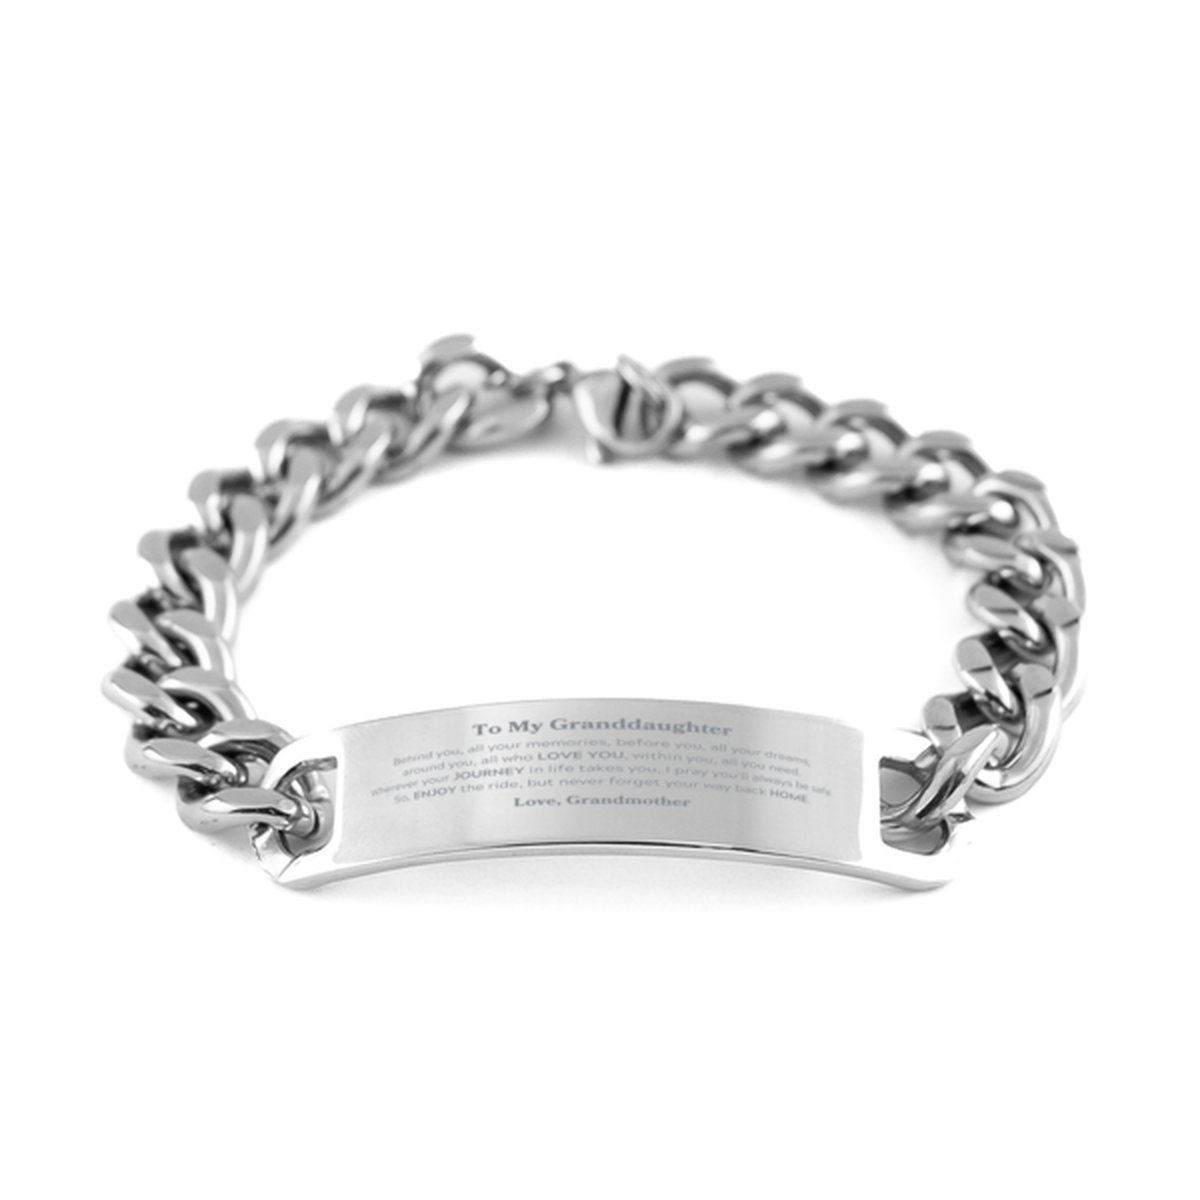 To My Granddaughter Graduation Gifts from Grandmother, Granddaughter Cuban Chain Stainless Steel Bracelet Christmas Birthday Gifts for Granddaughter Behind you, all your memories, before you, all your dreams. Love, Grandmother